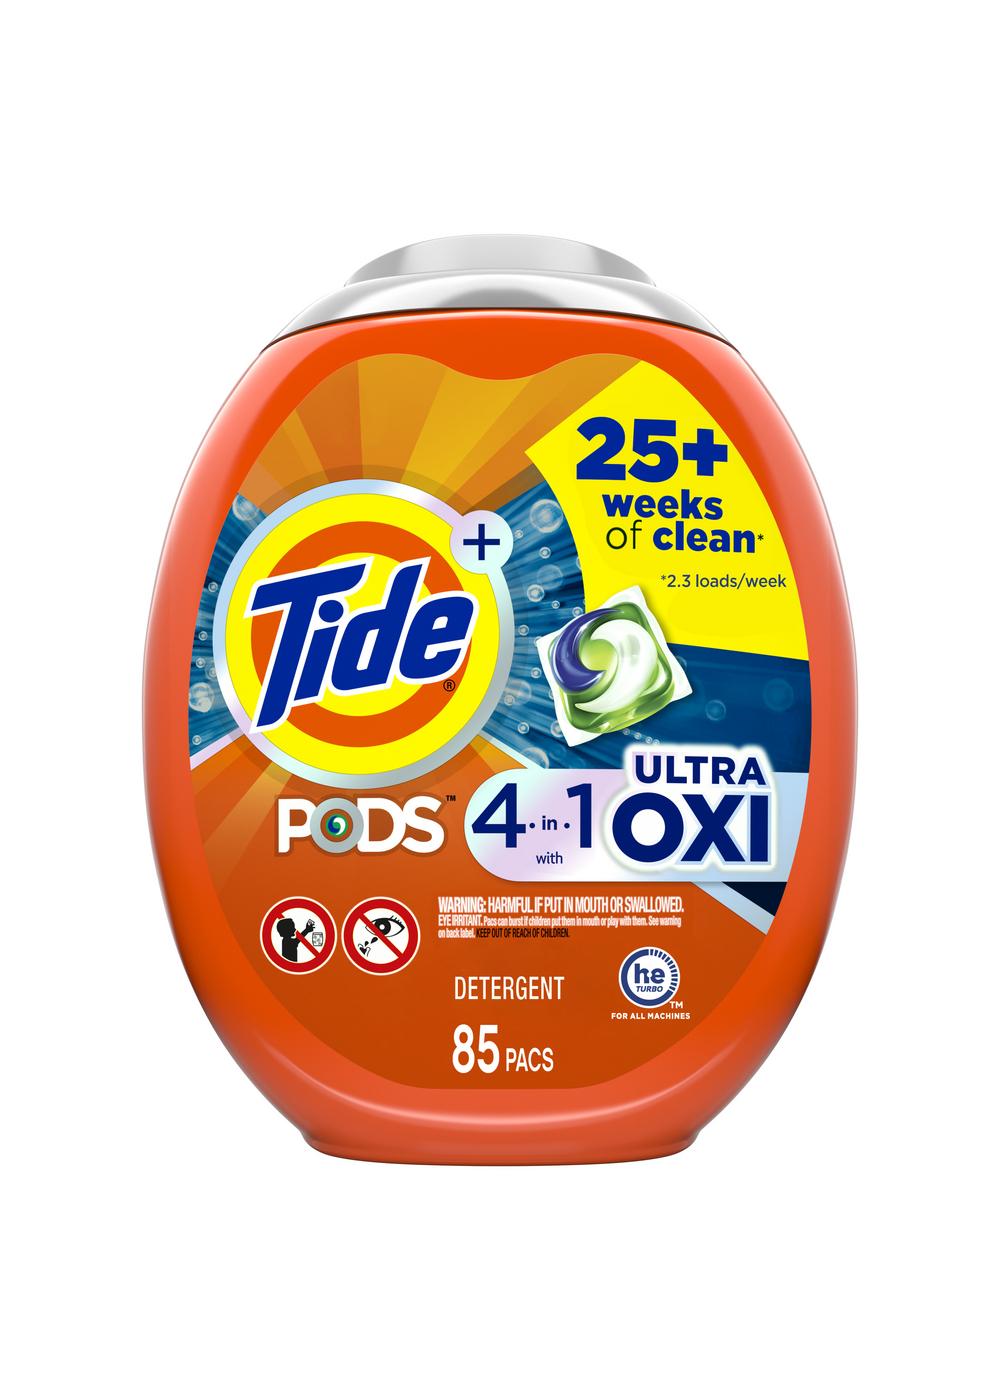 Tide PODS Ultra Oxi HE Laundry Detergent Pacs; image 8 of 9